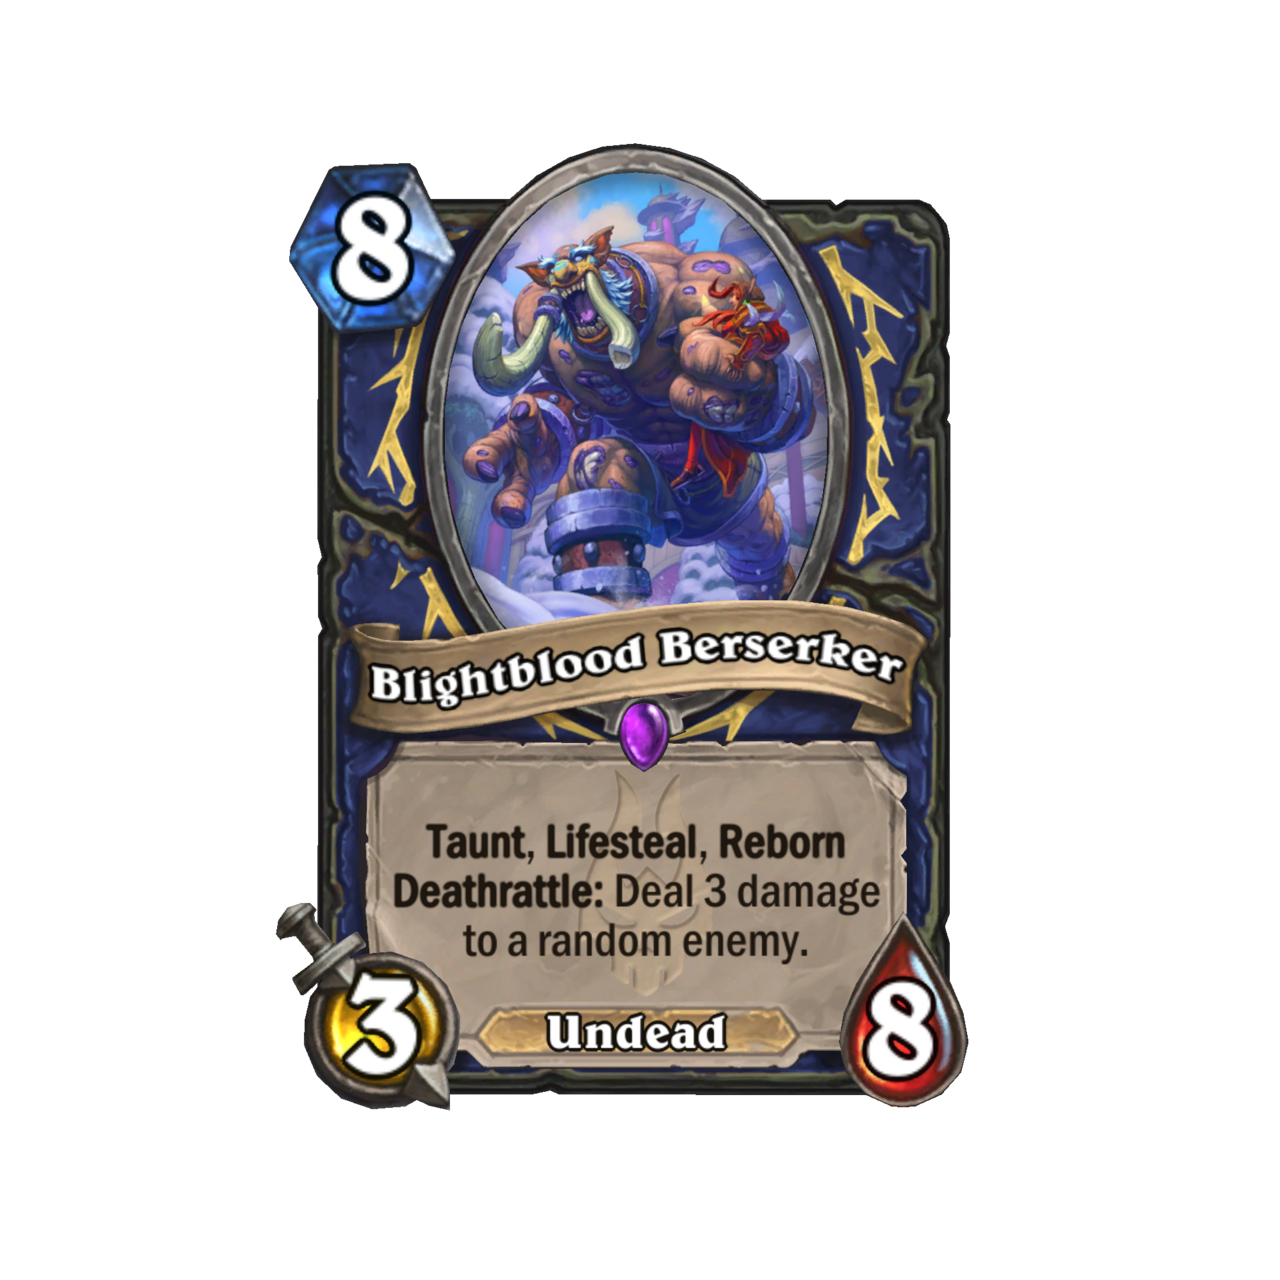 Hearthstone March Of The Lich King Card Revealed – Shaman Gets Huge Guys